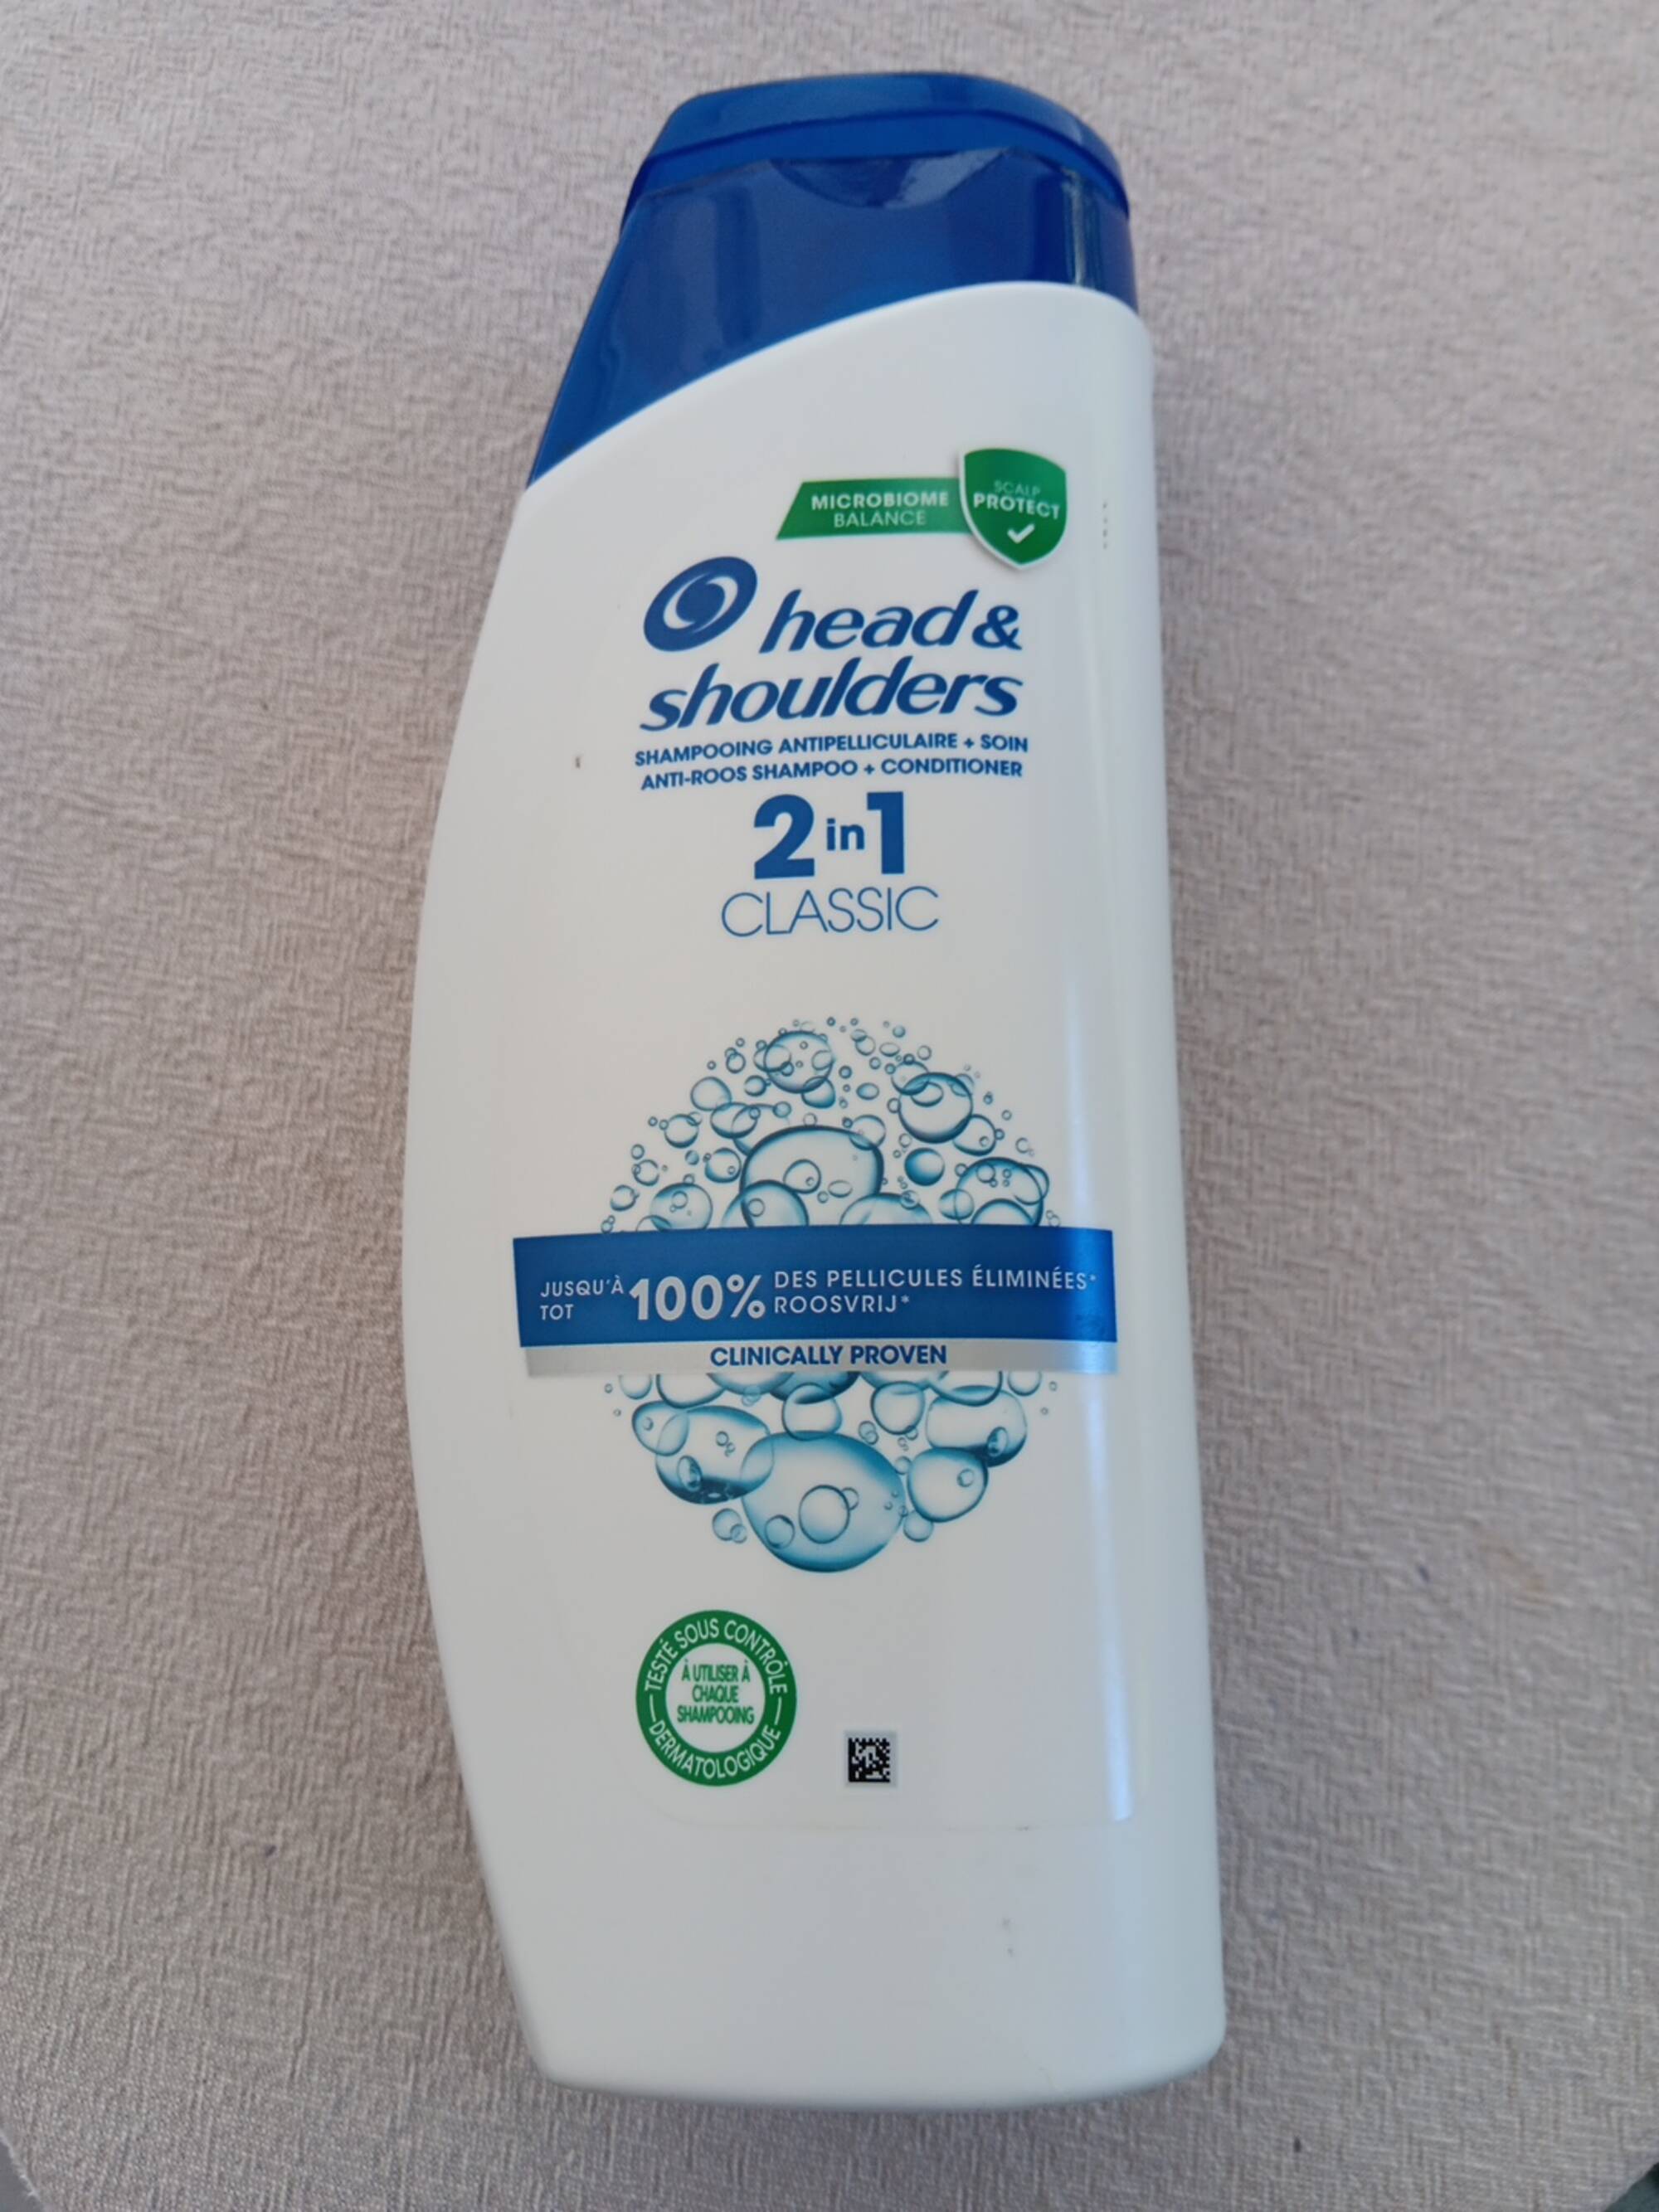 HEAD & SHOULDERS - Shampooing antipelliculaire + soin